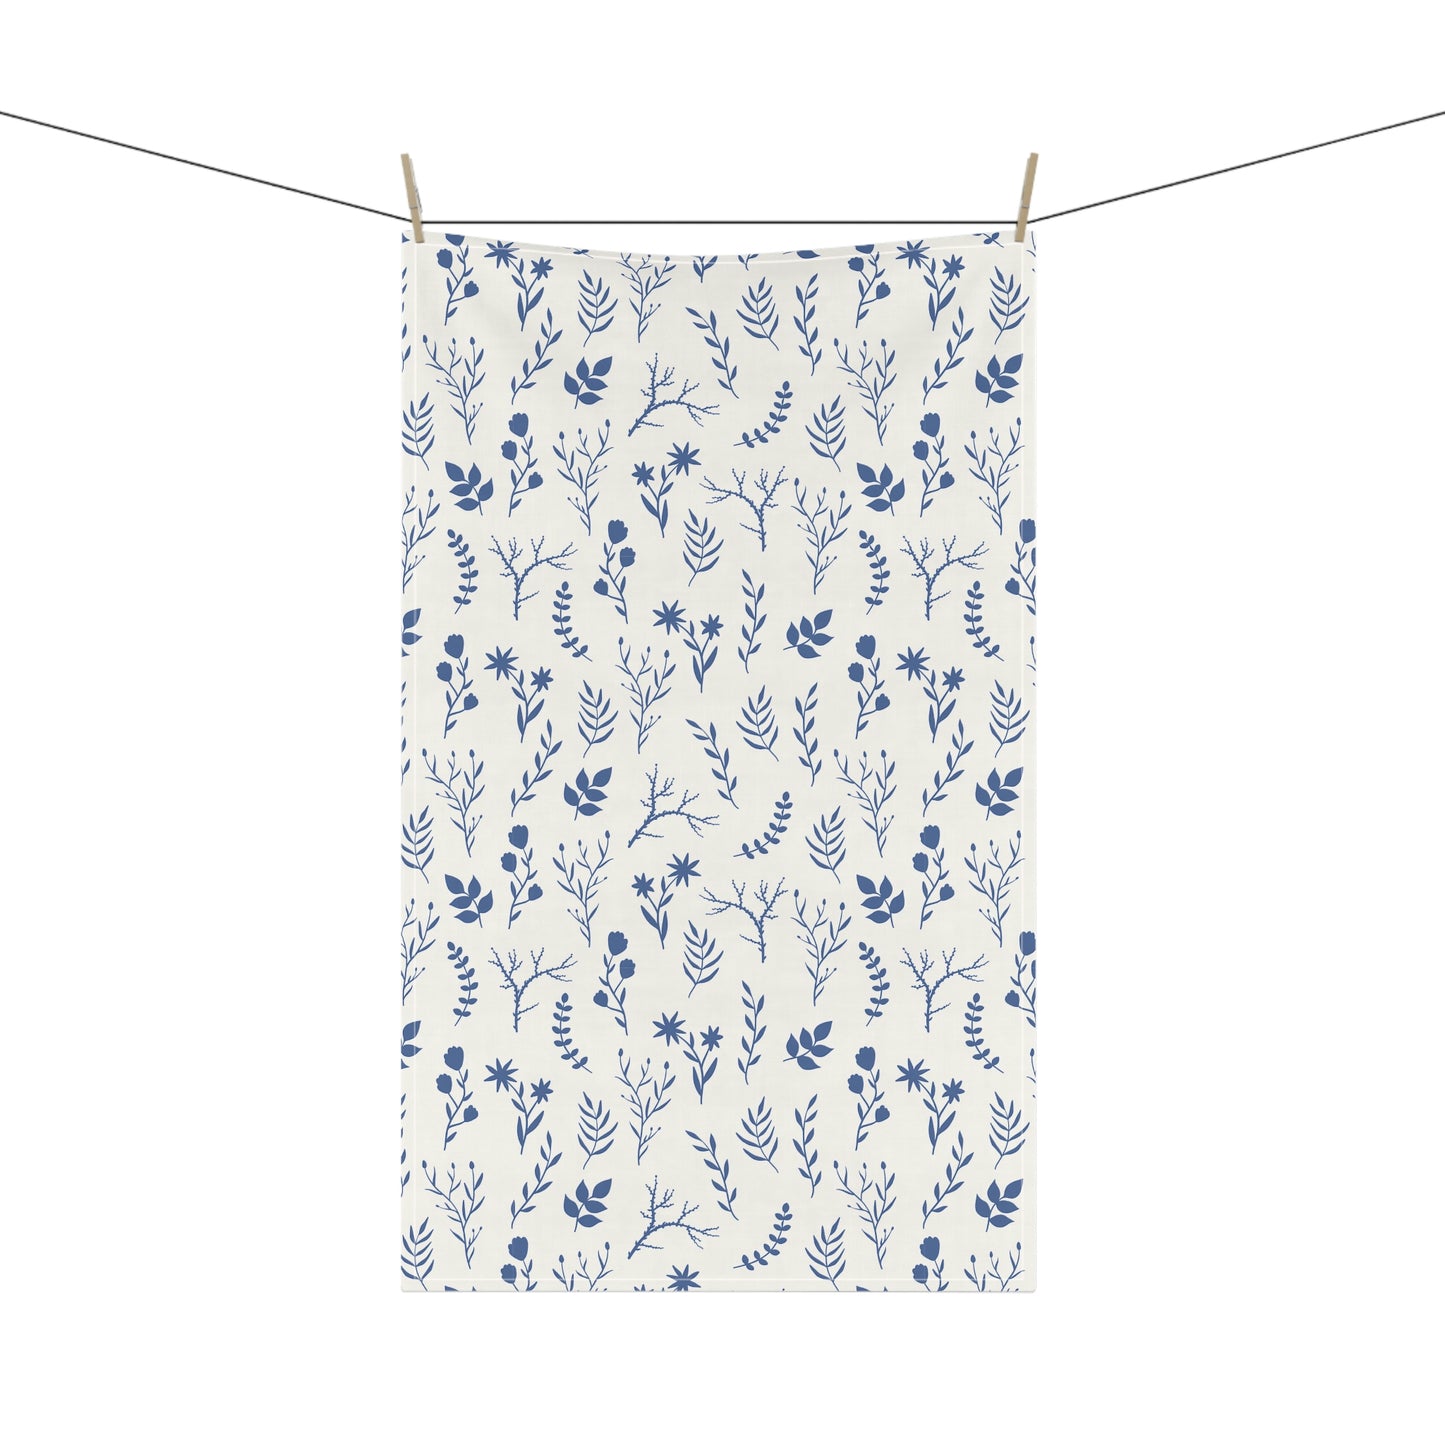 Indigo Blue and White Floral Dish Towel